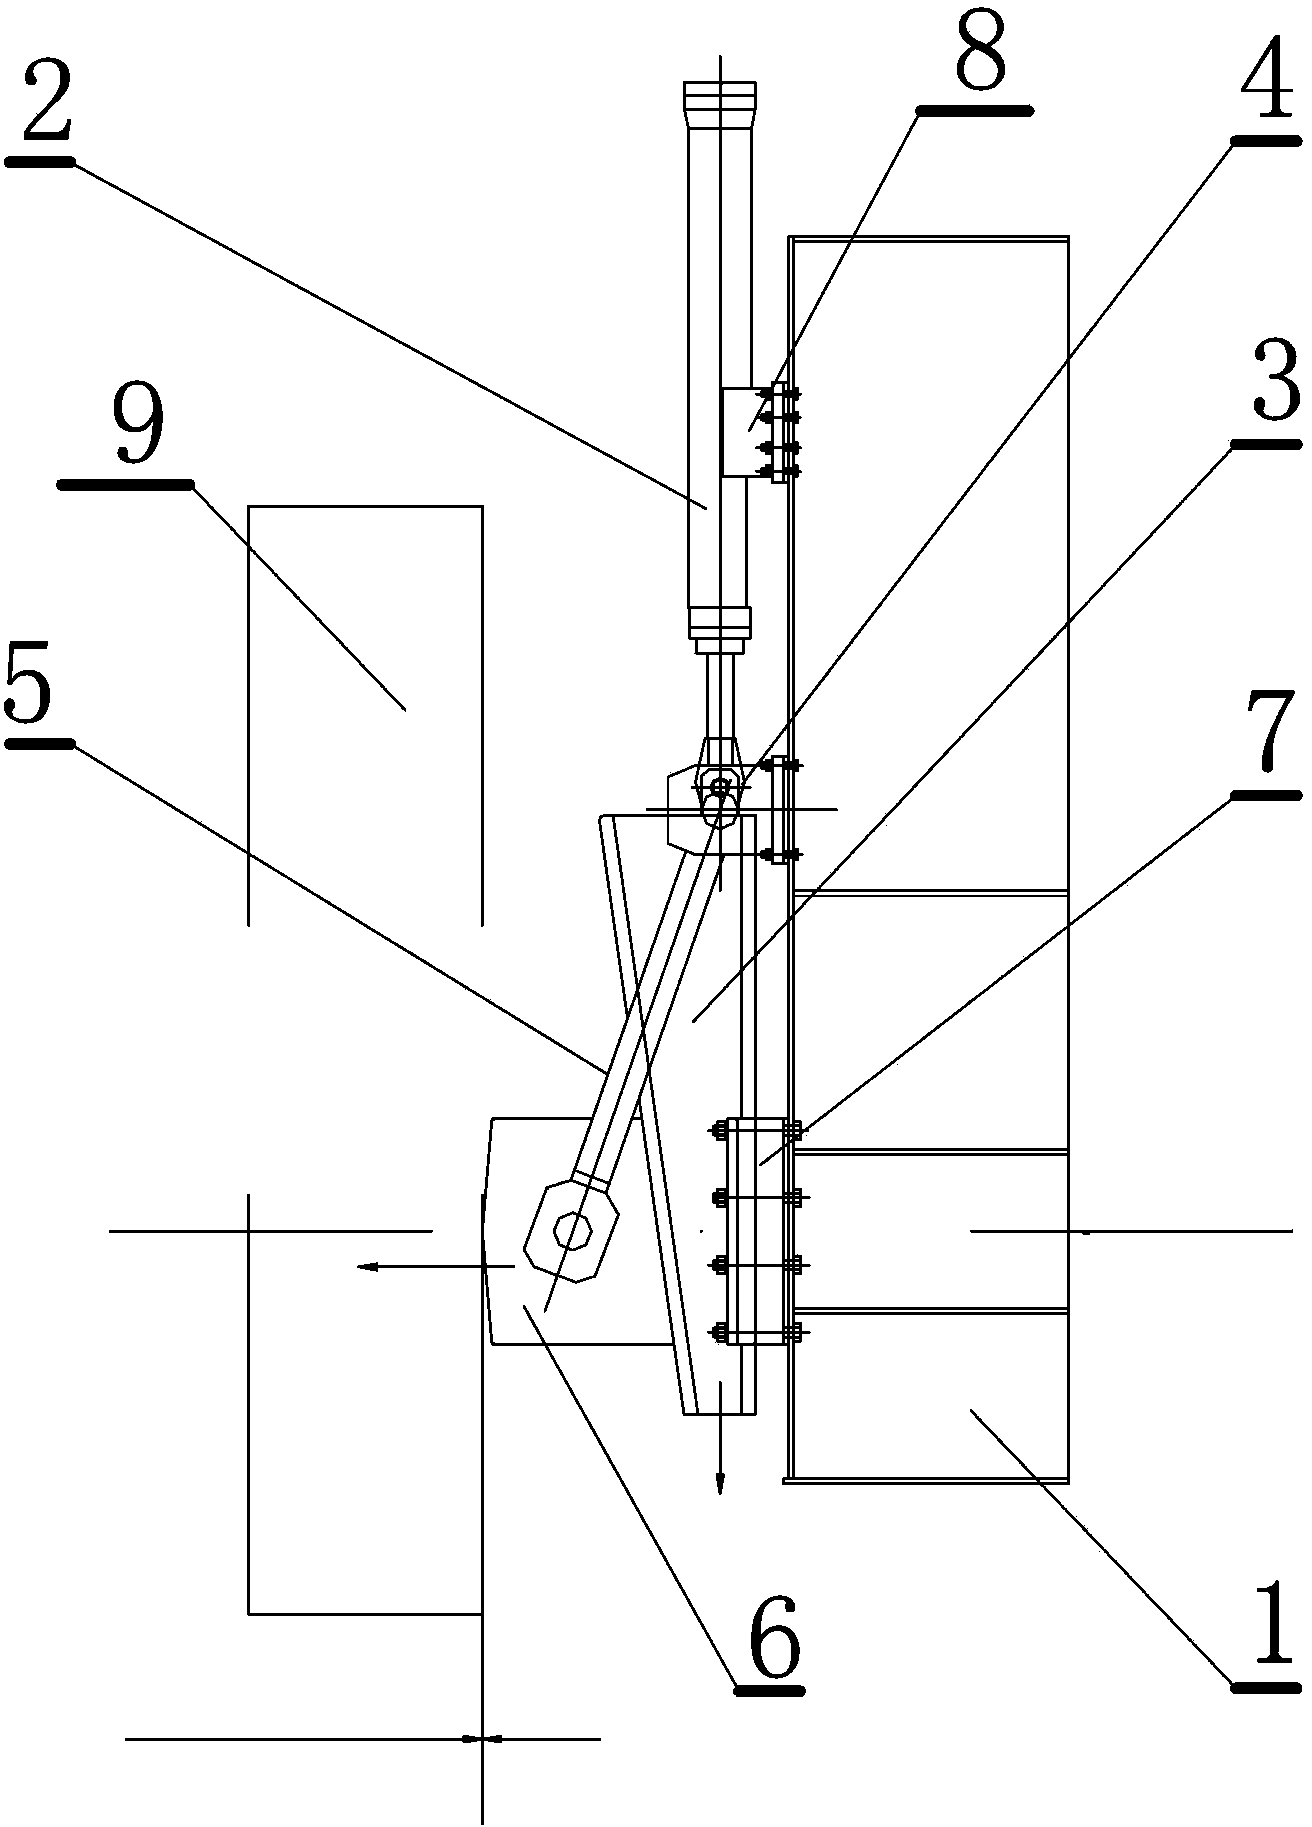 Wedge-shaped block self-locking top tight device for ship lift